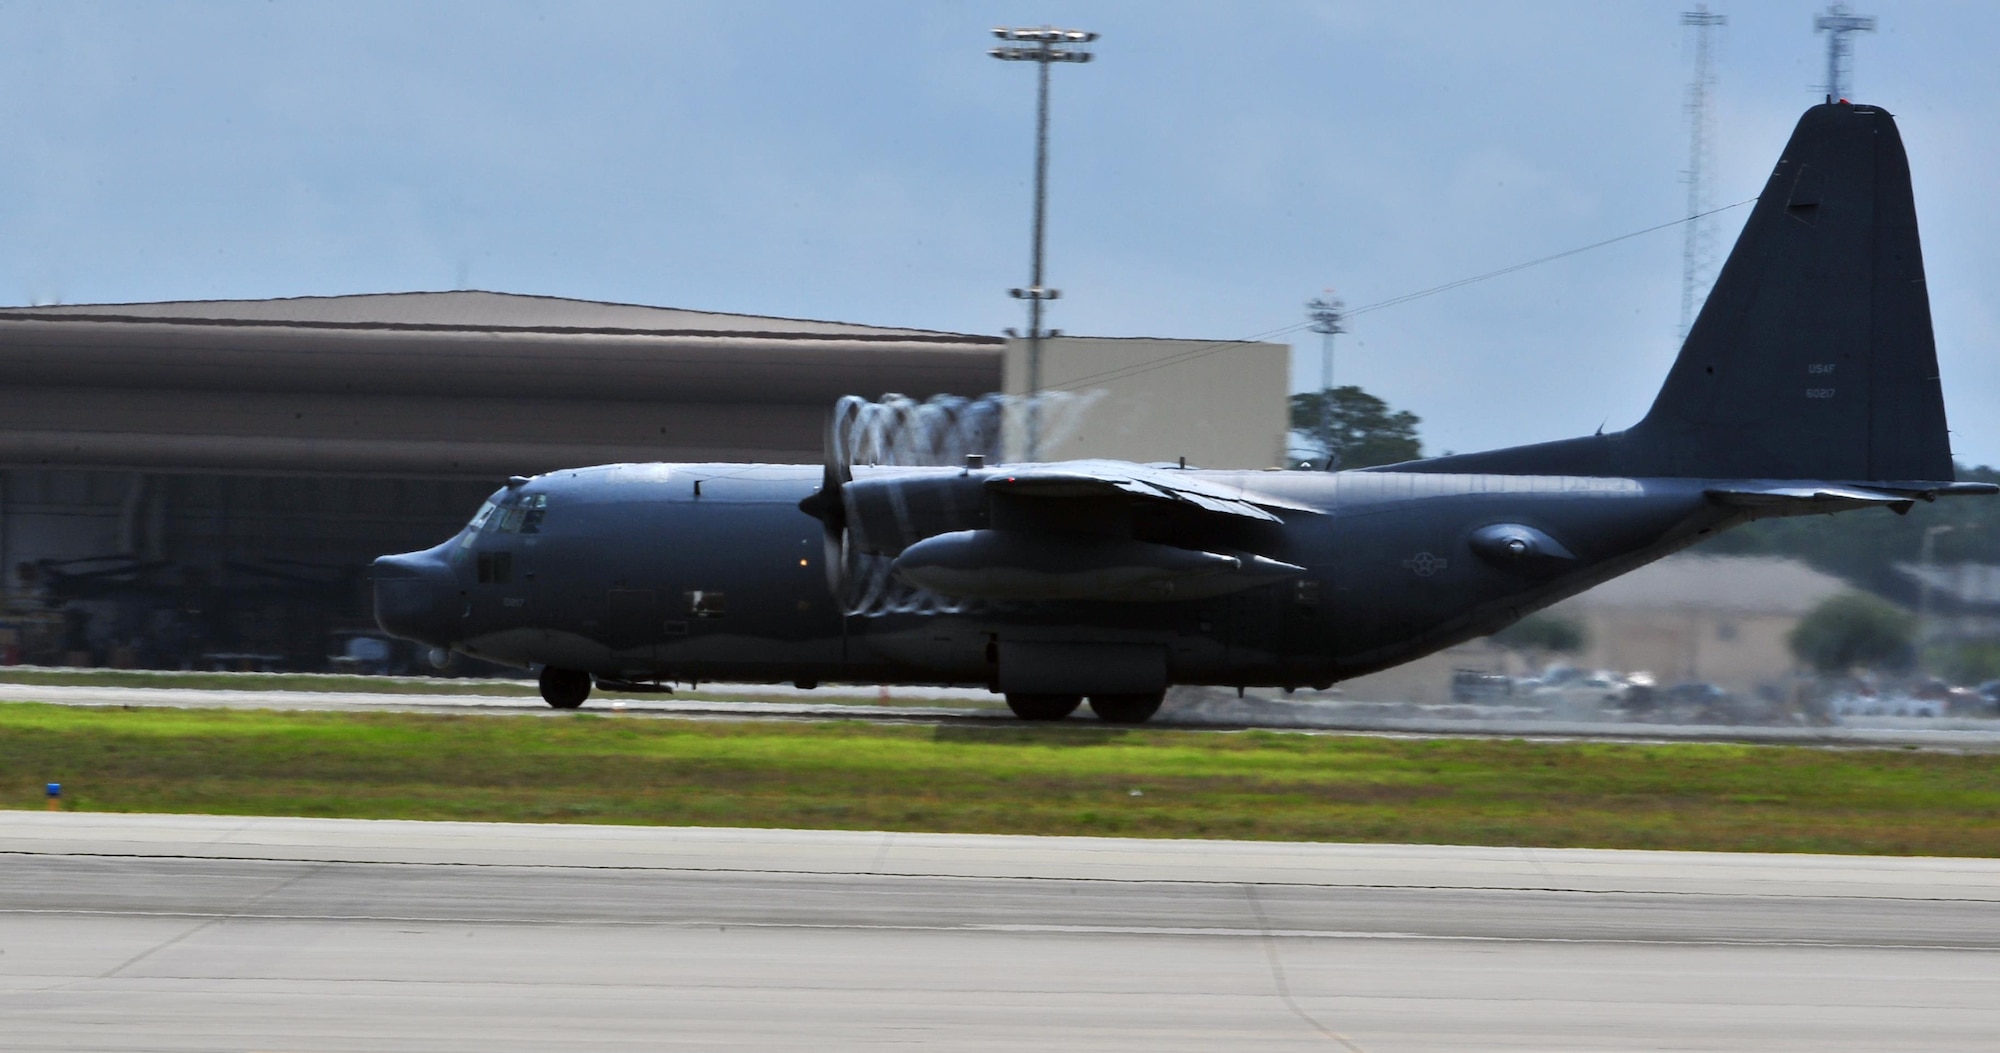 An MC-130P Combat Shadow takes off on its final flight, May 15, 2015, at Hurlburt Field, Fla. Aircrafts 66-0217 and 69-5819 are the last two MC-130P Combat Shadow aircraft in the Air Force to be retired. On June 1, 217 and 819 will take their last flight to the boneyard at Davis-Monthan Air Force Base, Arizona. (U.S. Air Force photo/Airman 1st Class Ryan Conroy) 